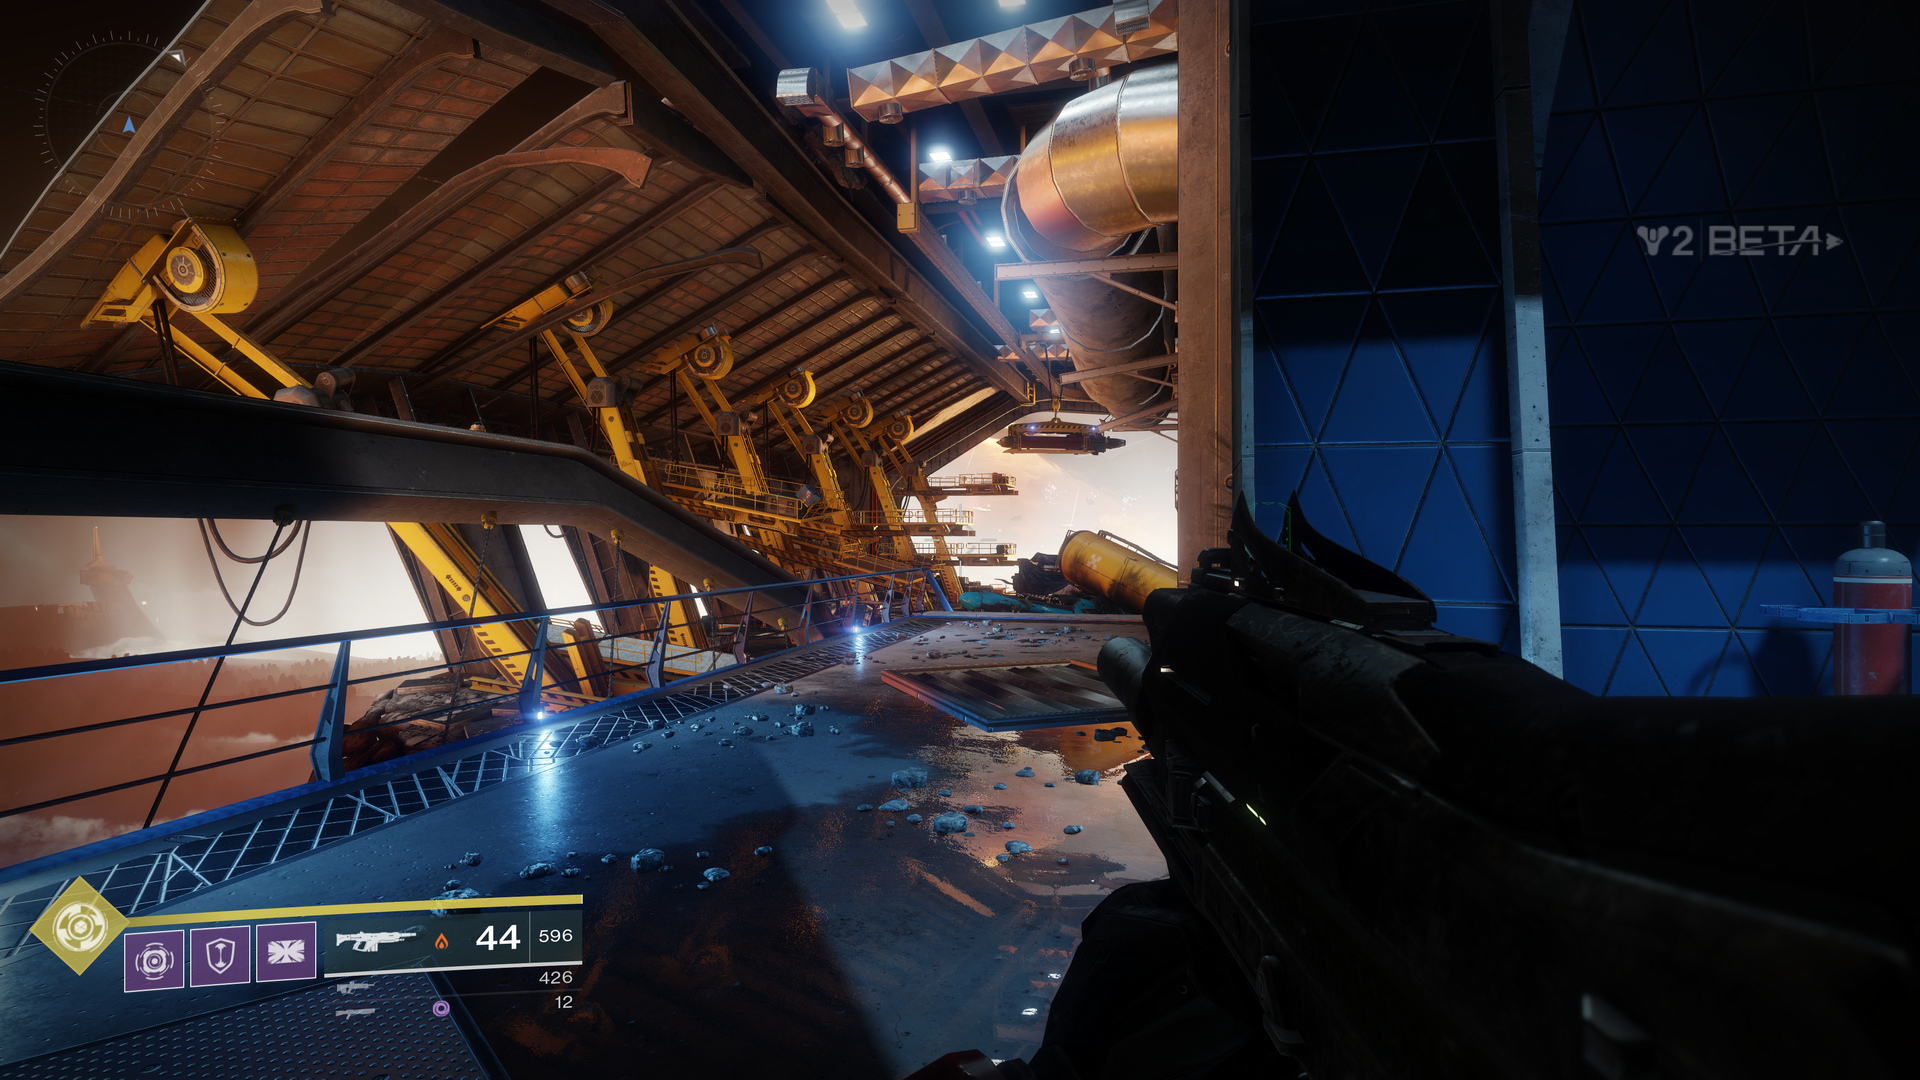 Destiny 2 looks absolutely incredible on the PC